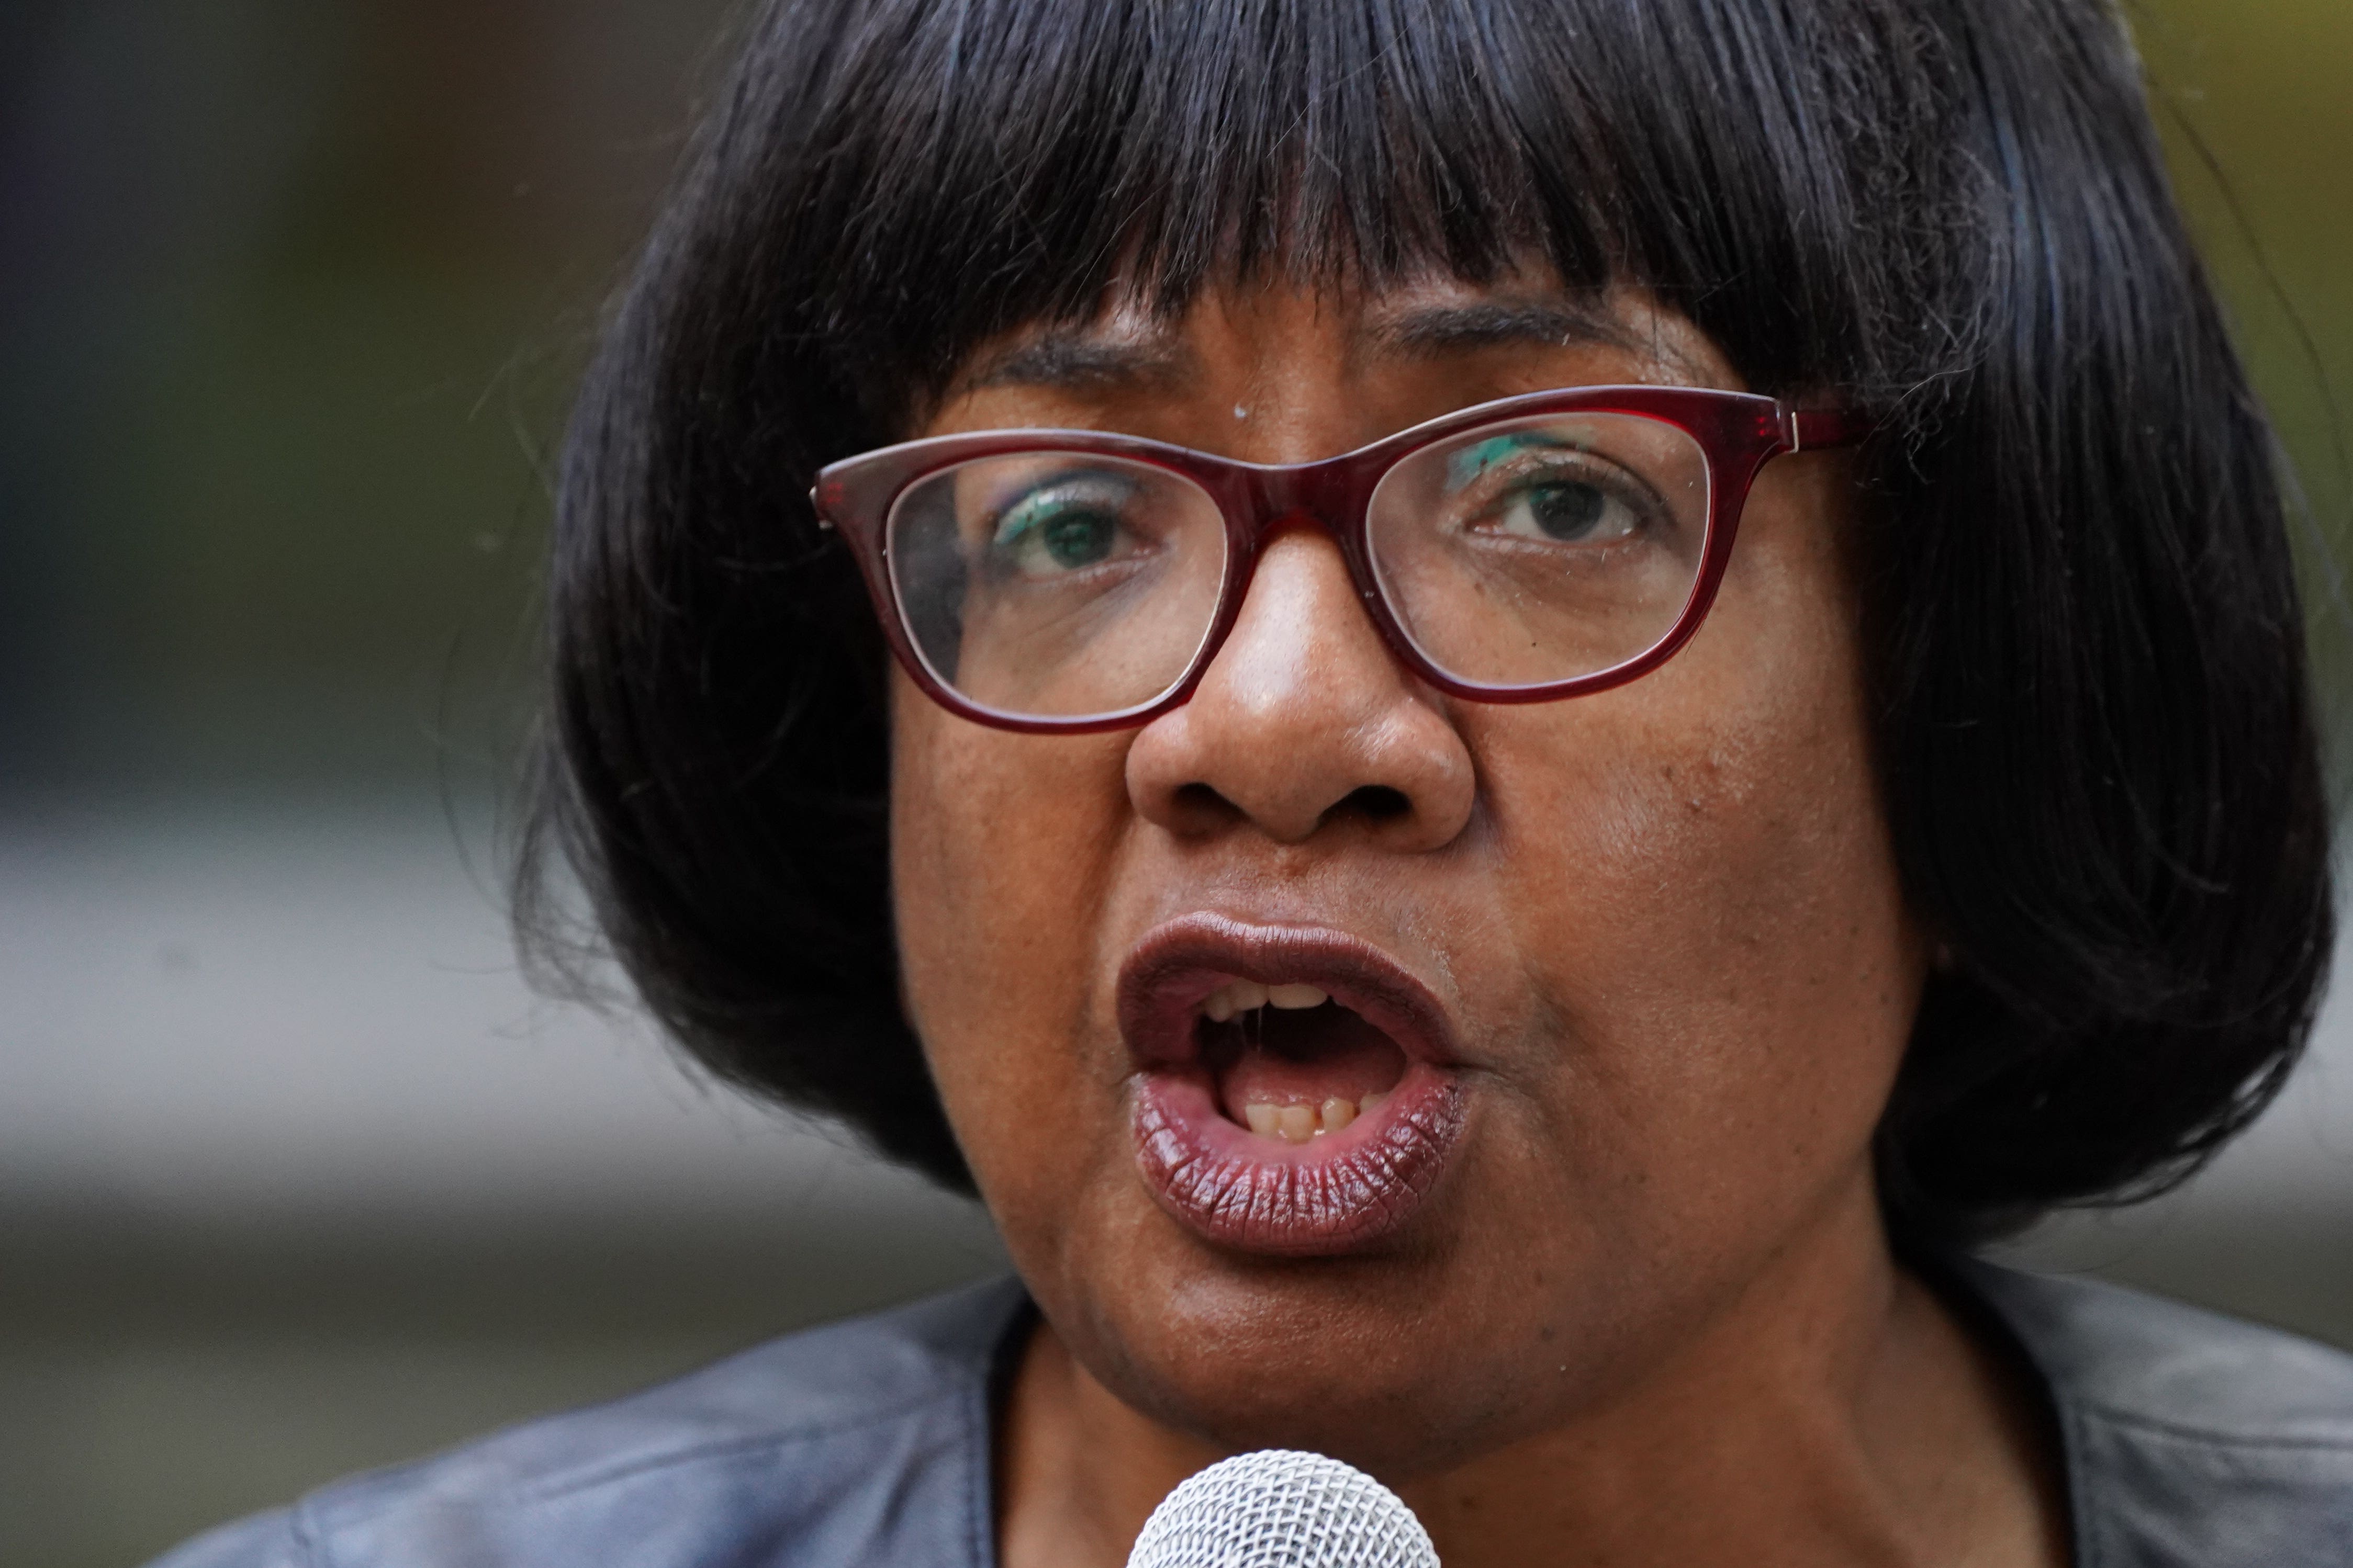 Diane Abbott has consistently received a disproportionate amount of abuse compared with other MPs